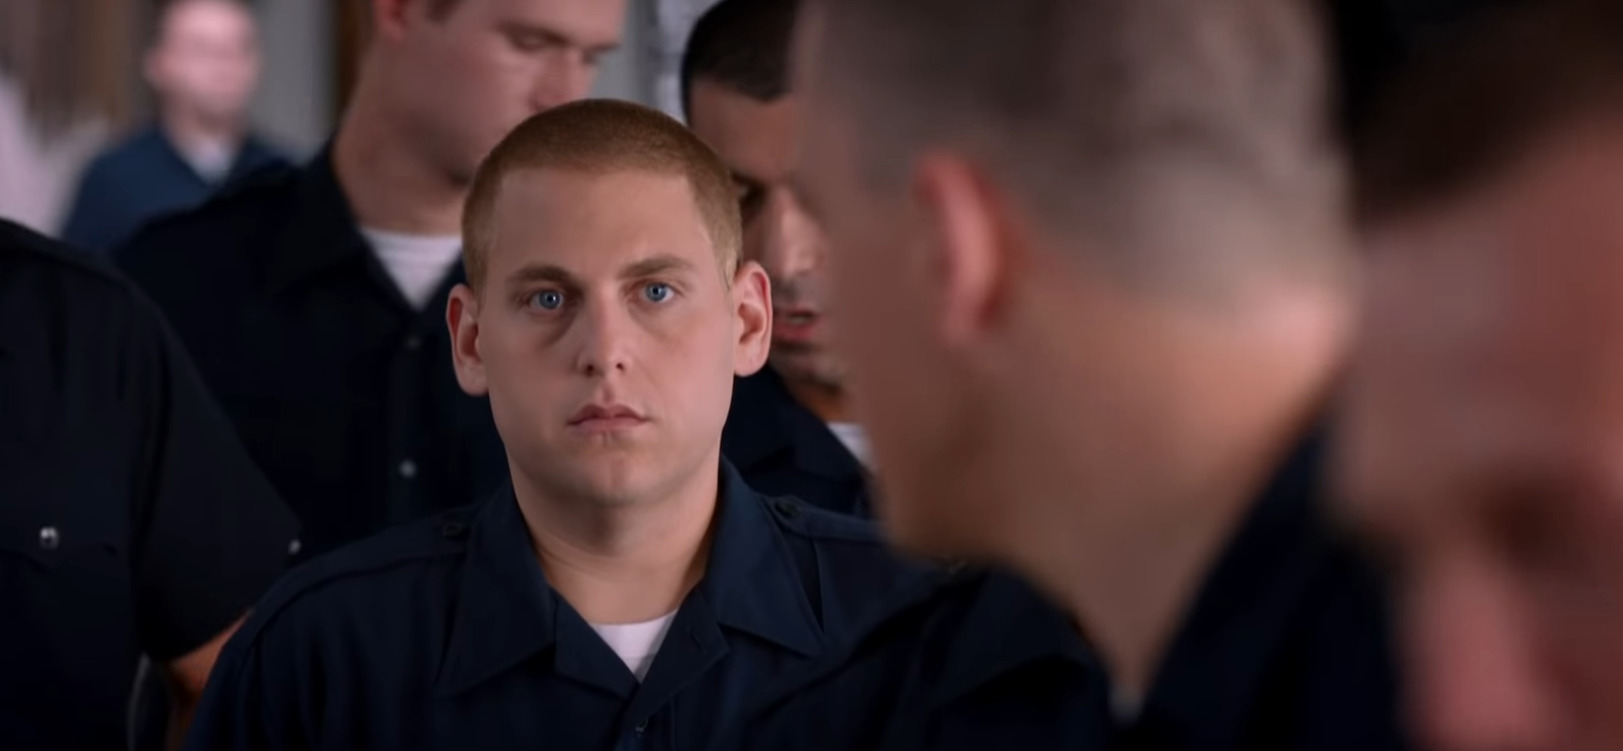 Is 21 Jump Street Based on a True Story?